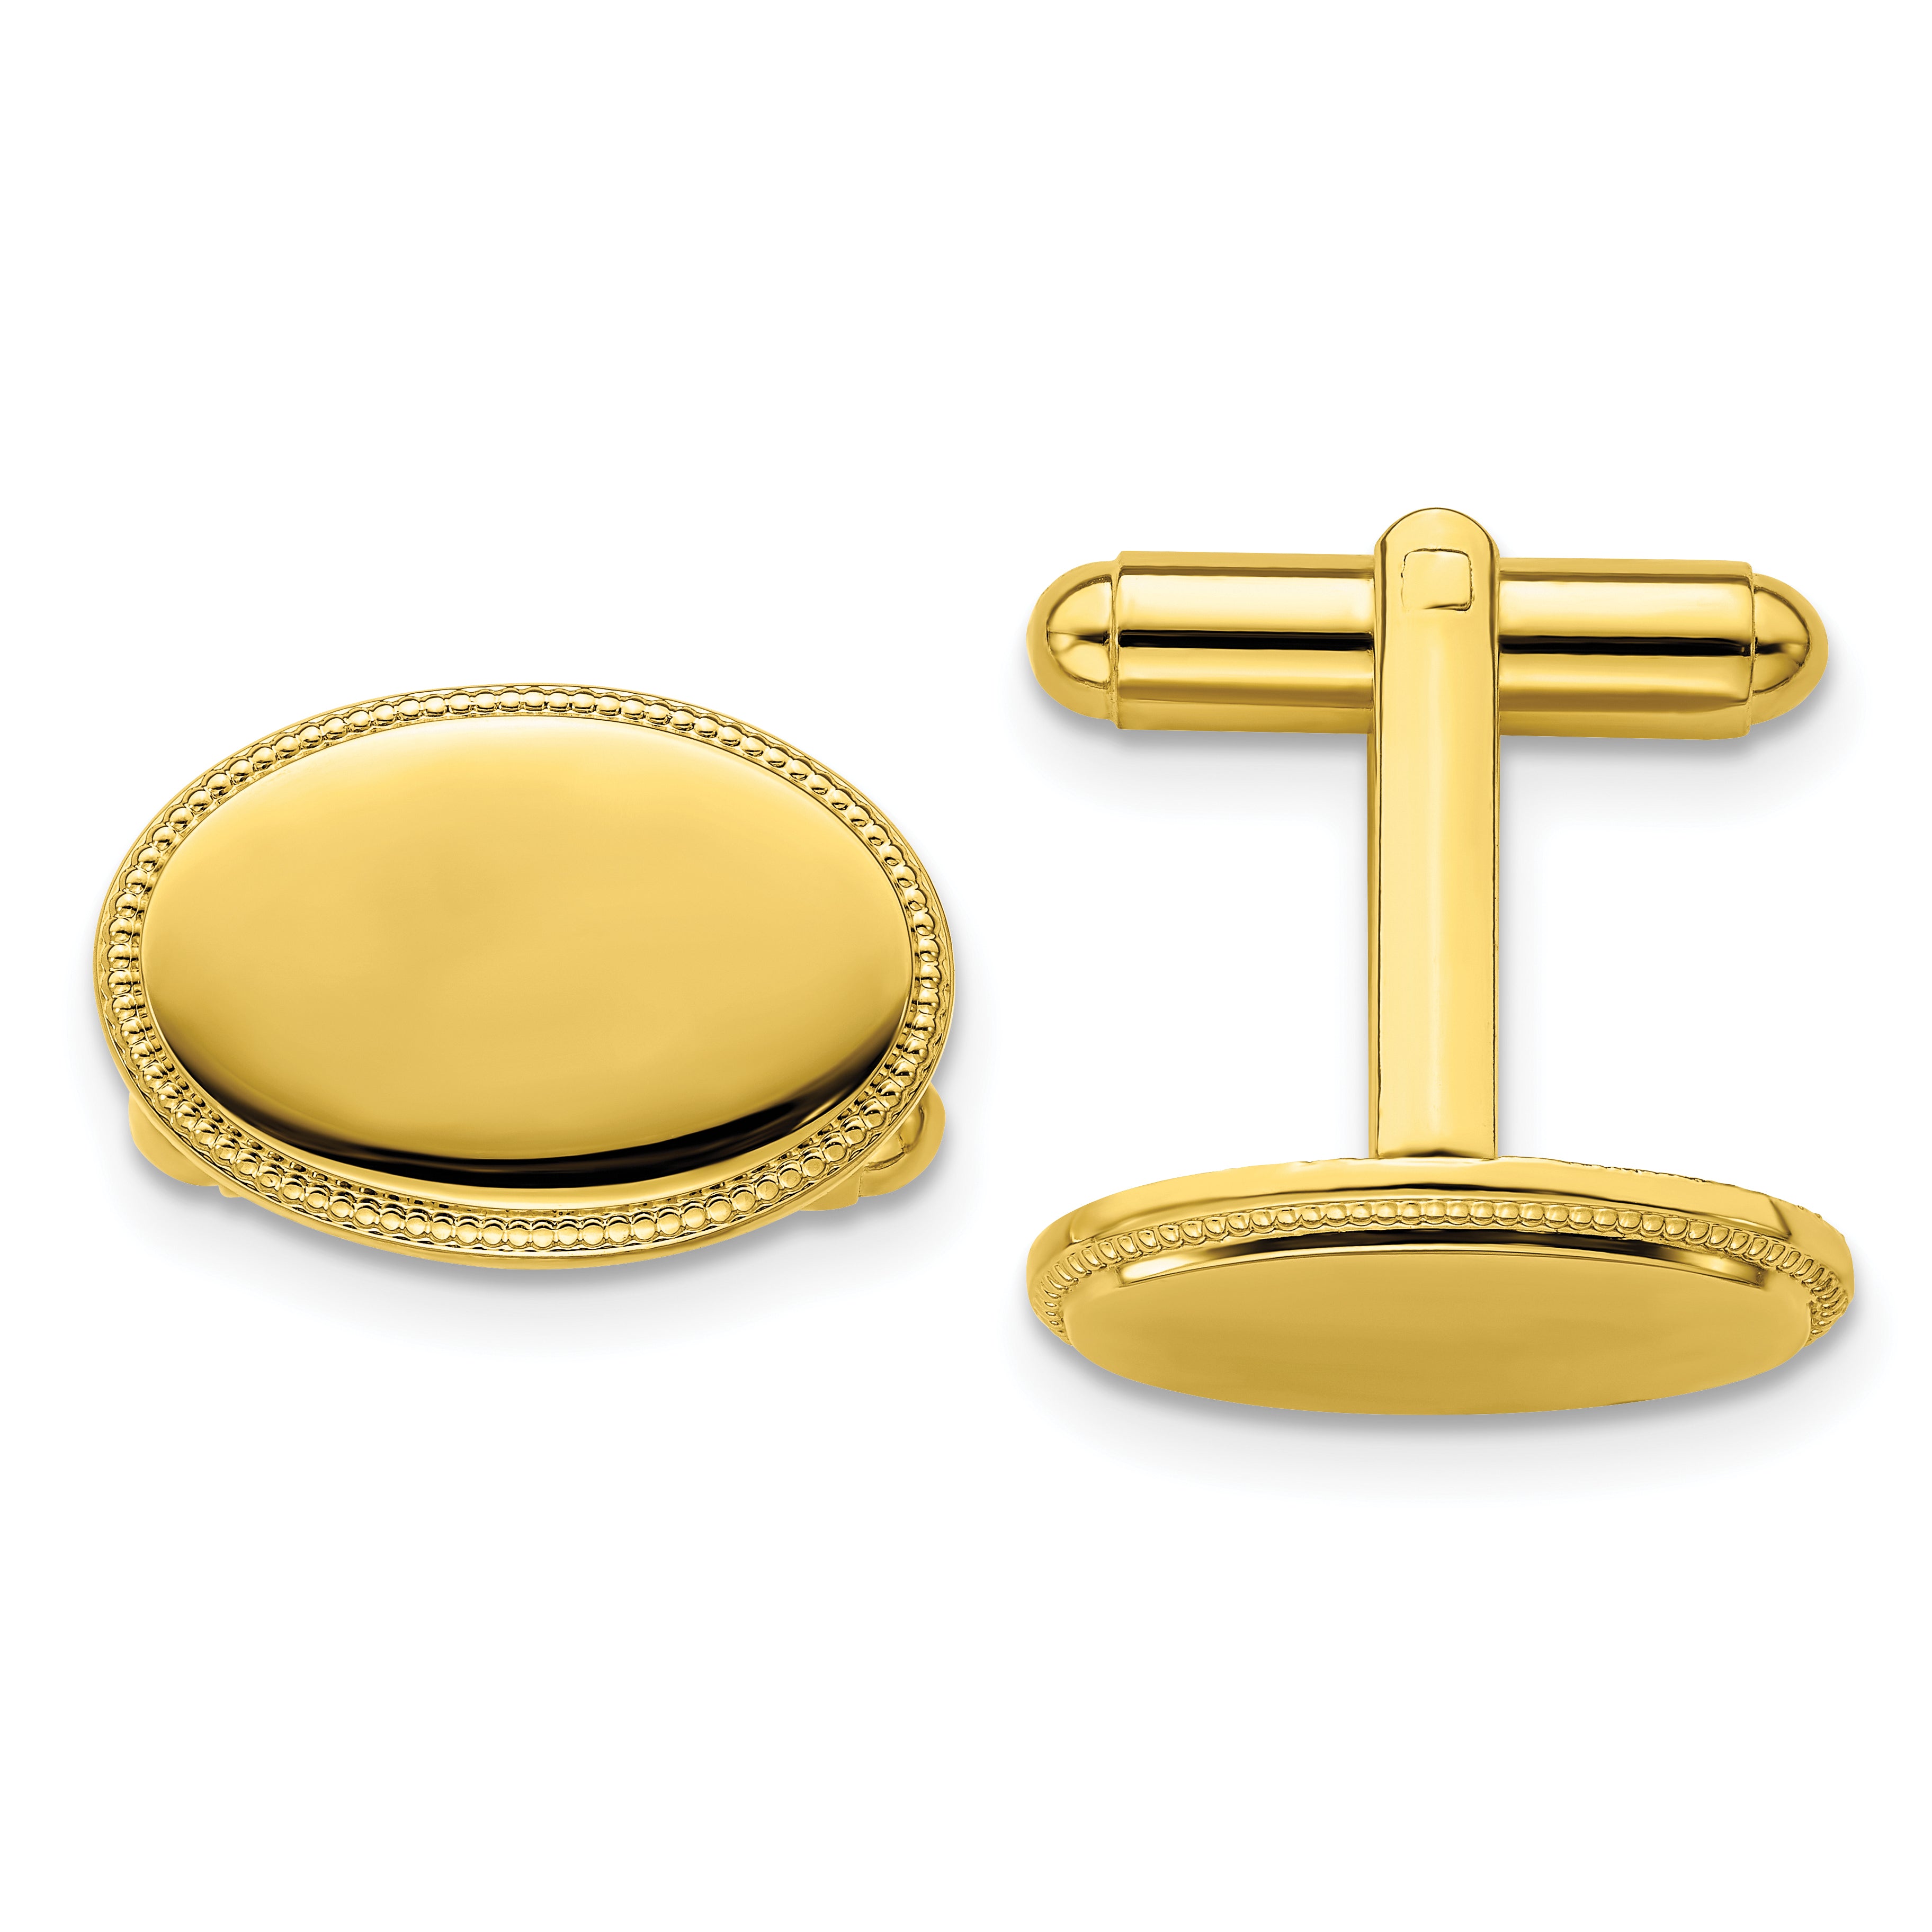 Kelly Waters Gold-plated Polished Beaded Oval Engravable Cuff Links